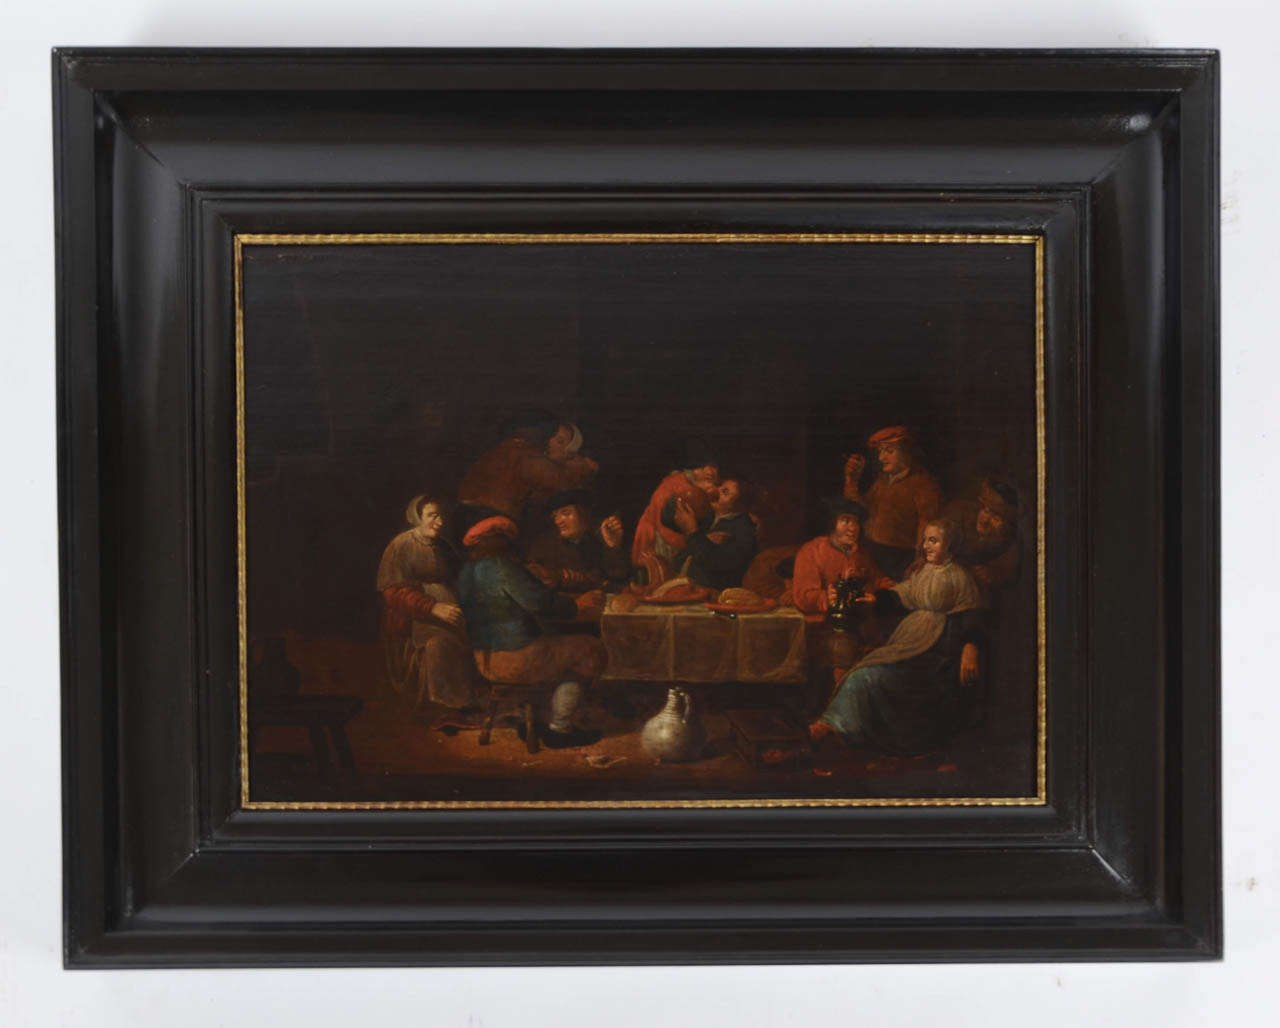 A framed oil painting on an oak panel of a tavern scene, signature in the bottom left 'P. Quast,f.